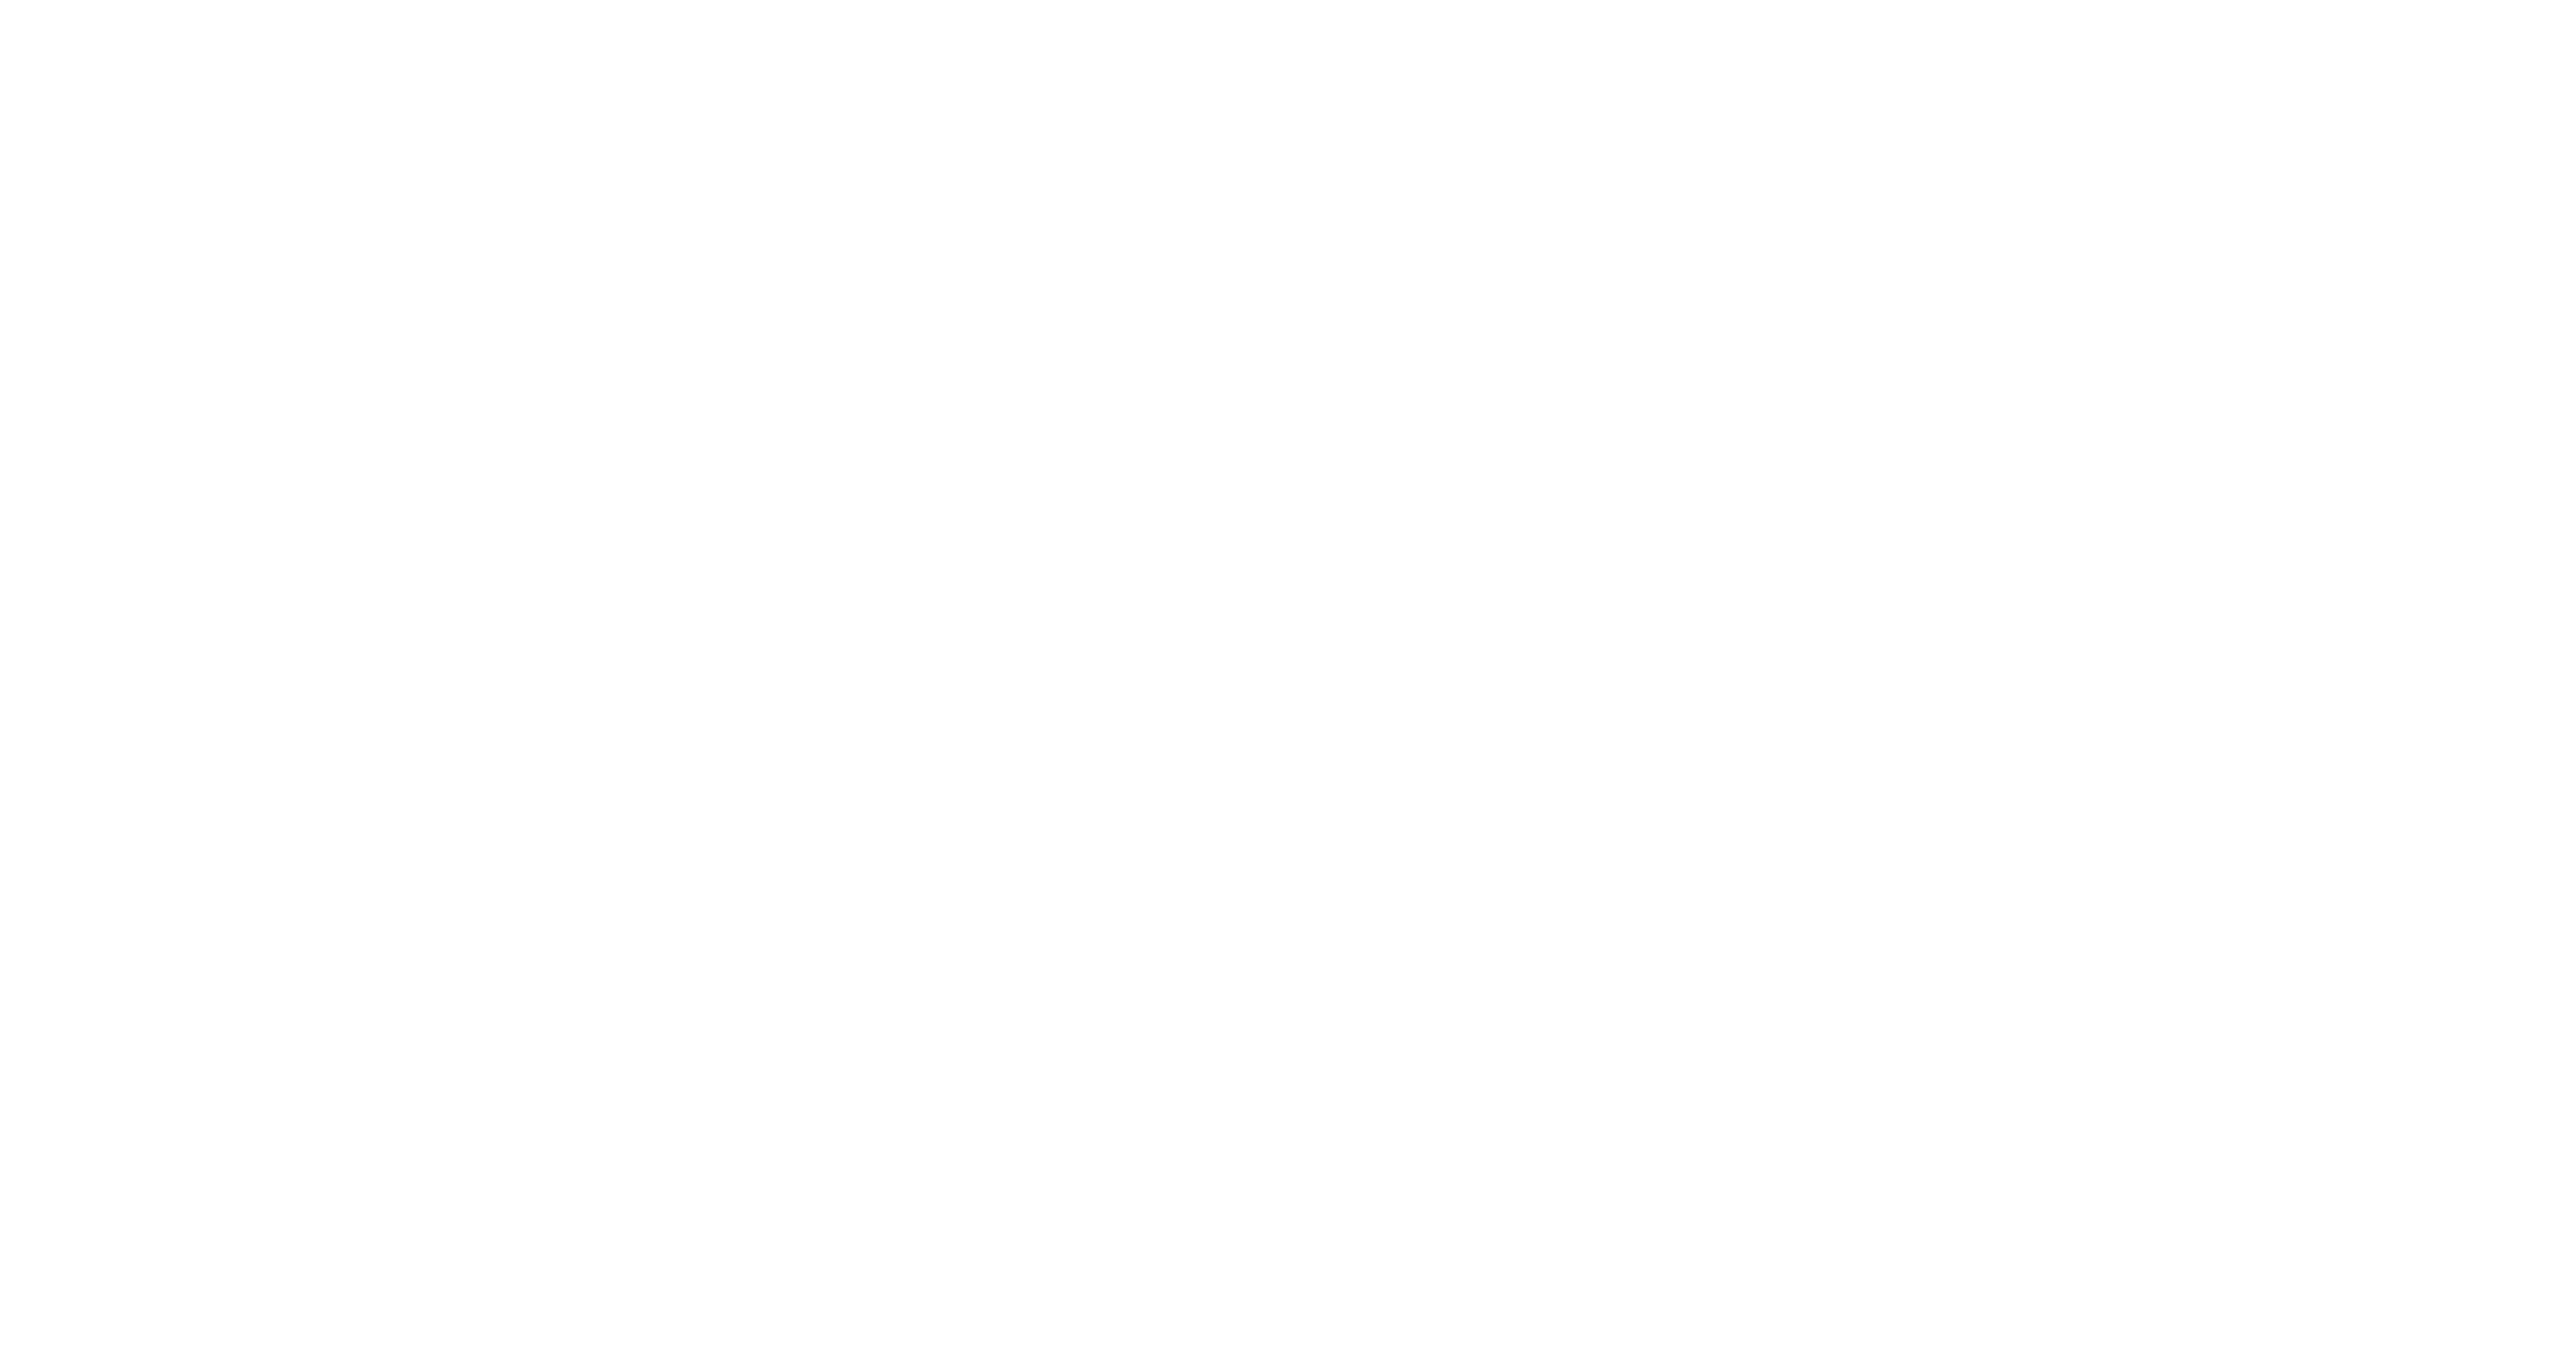 CLOUDREACH Technology – Good Career, We Deliver